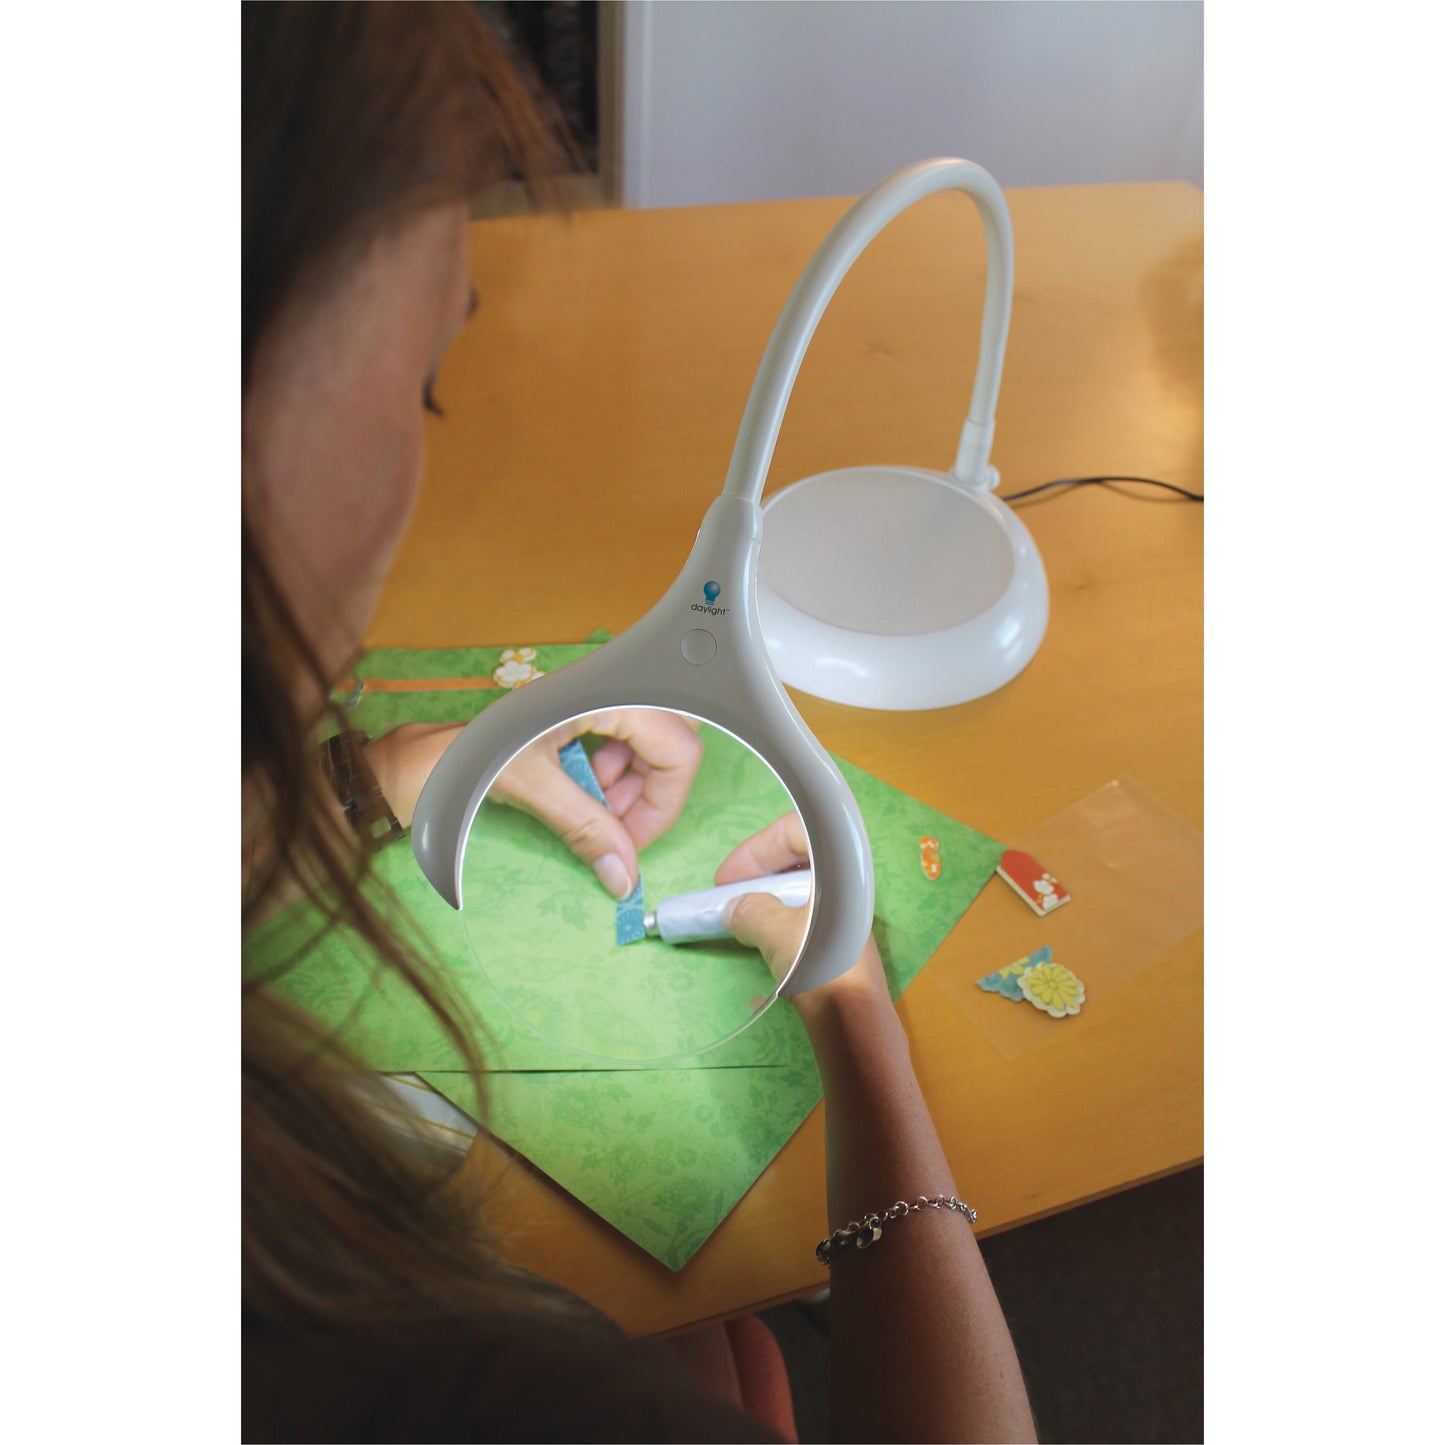 Daylight Company ~ Magnificent Pro Floor or Table LED Magnifying Lamp